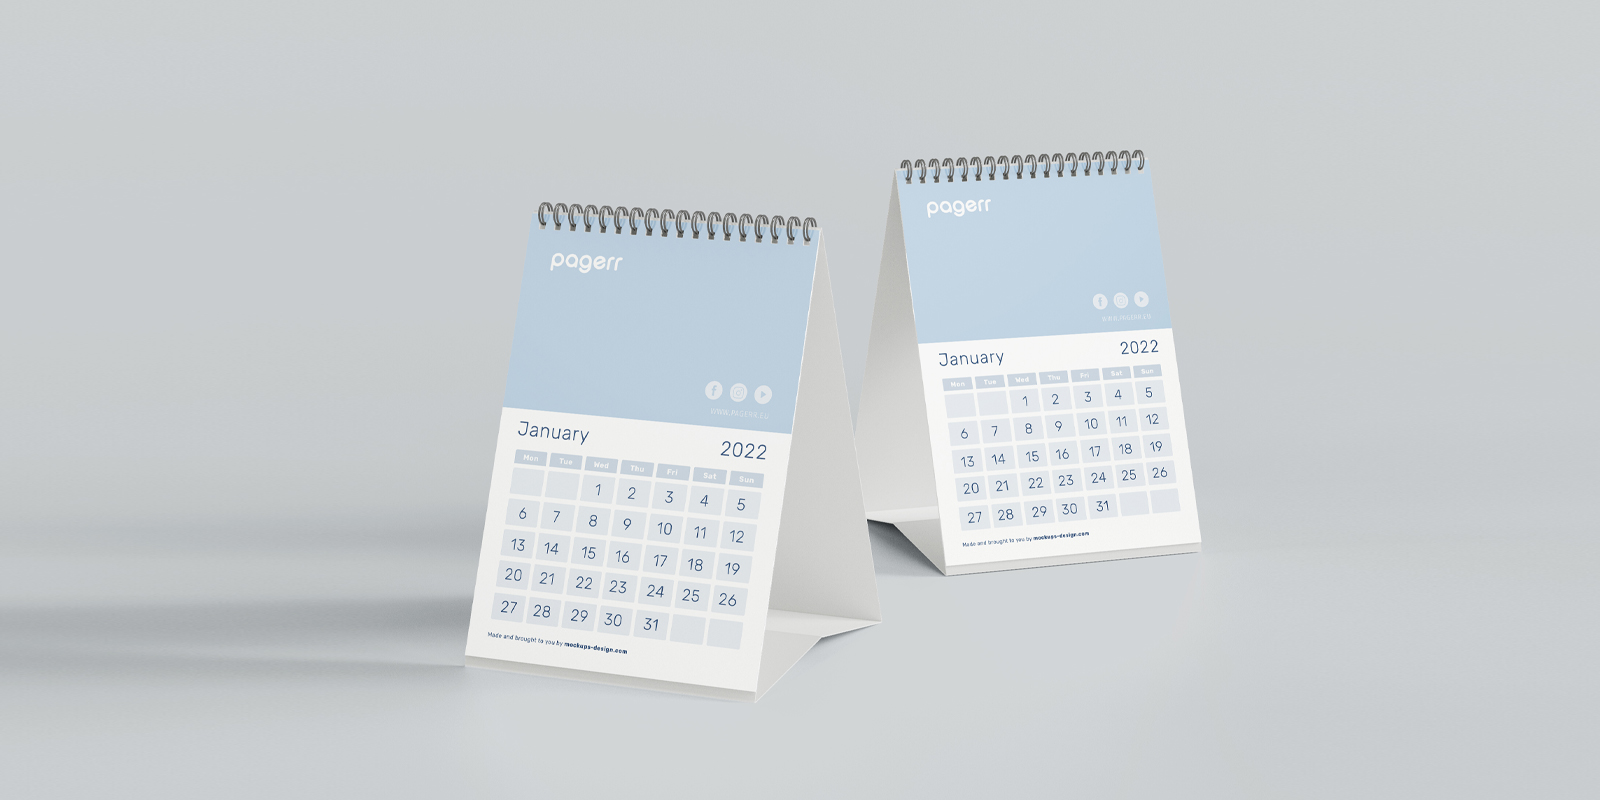 Desk calendars in Newcastle - Print with Pagerr